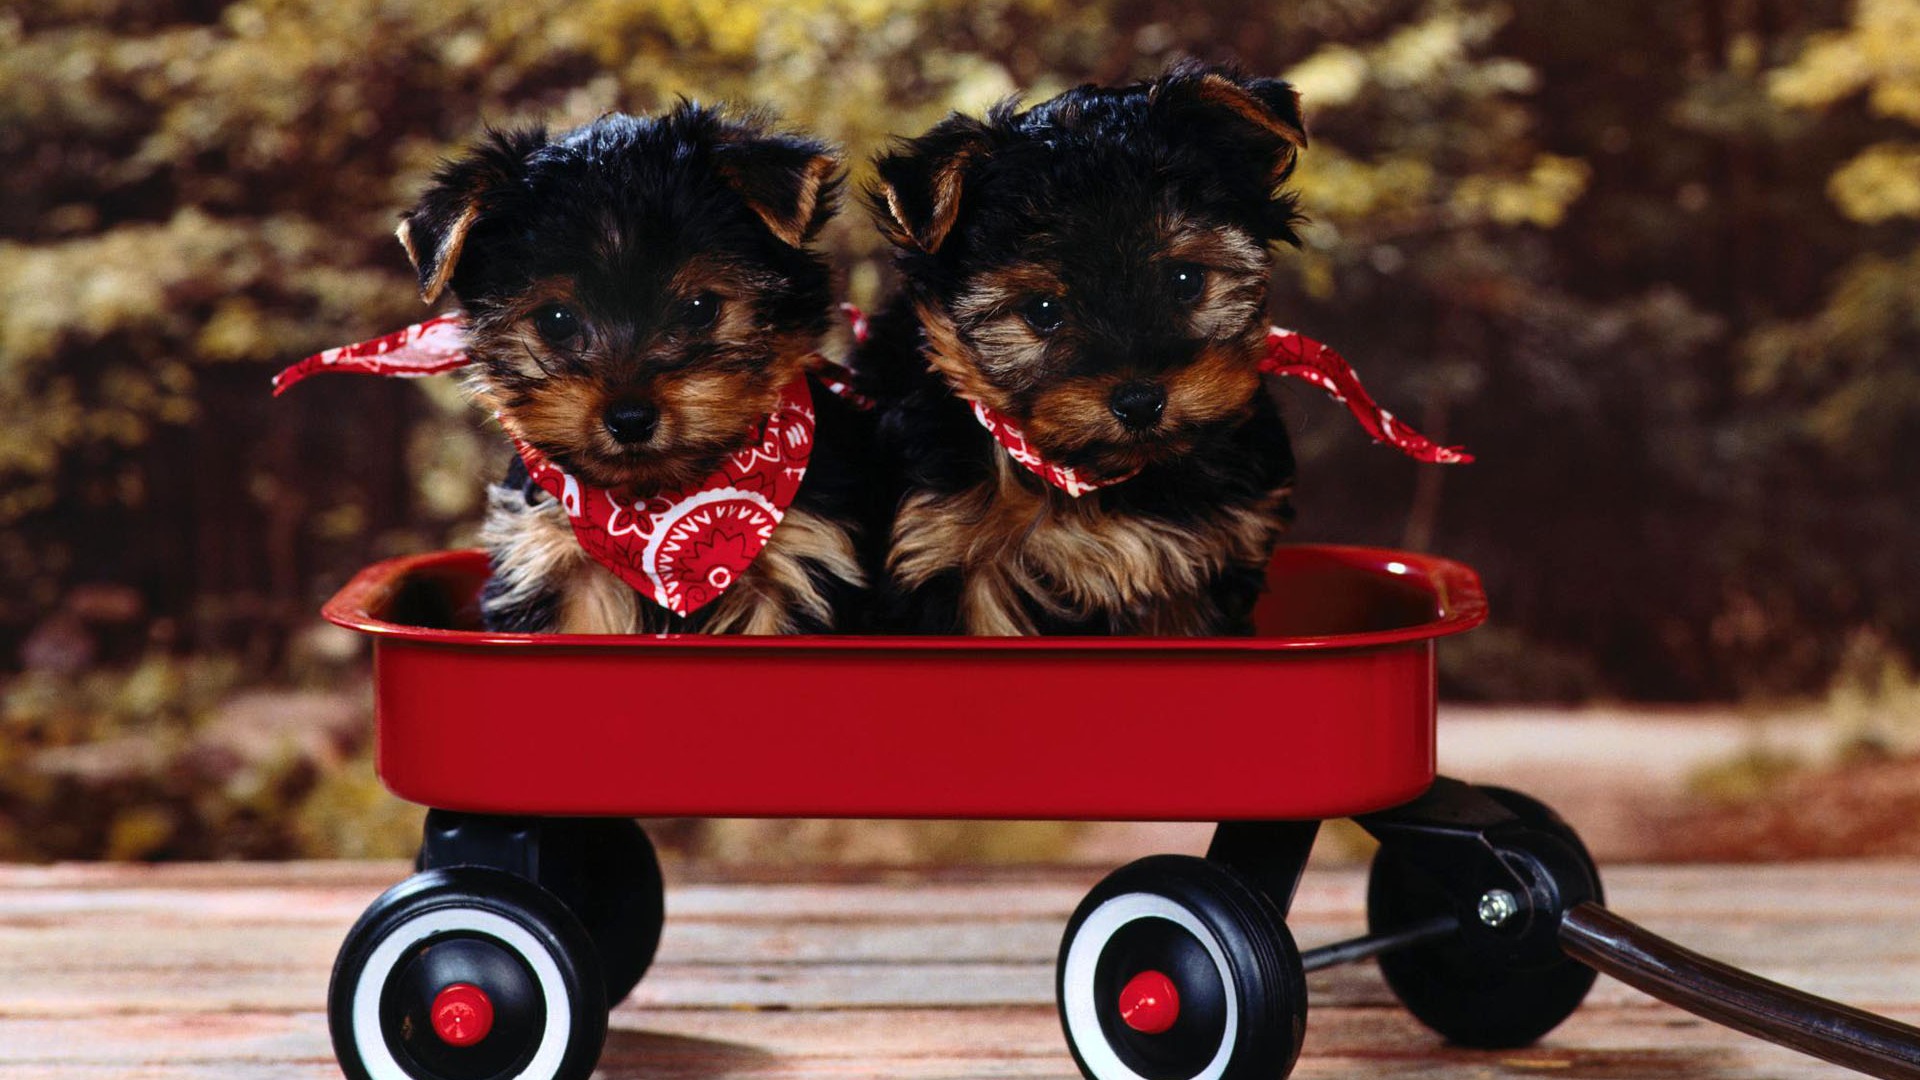 Puppy Photo HD wallpapers (2) #16 - 1920x1080